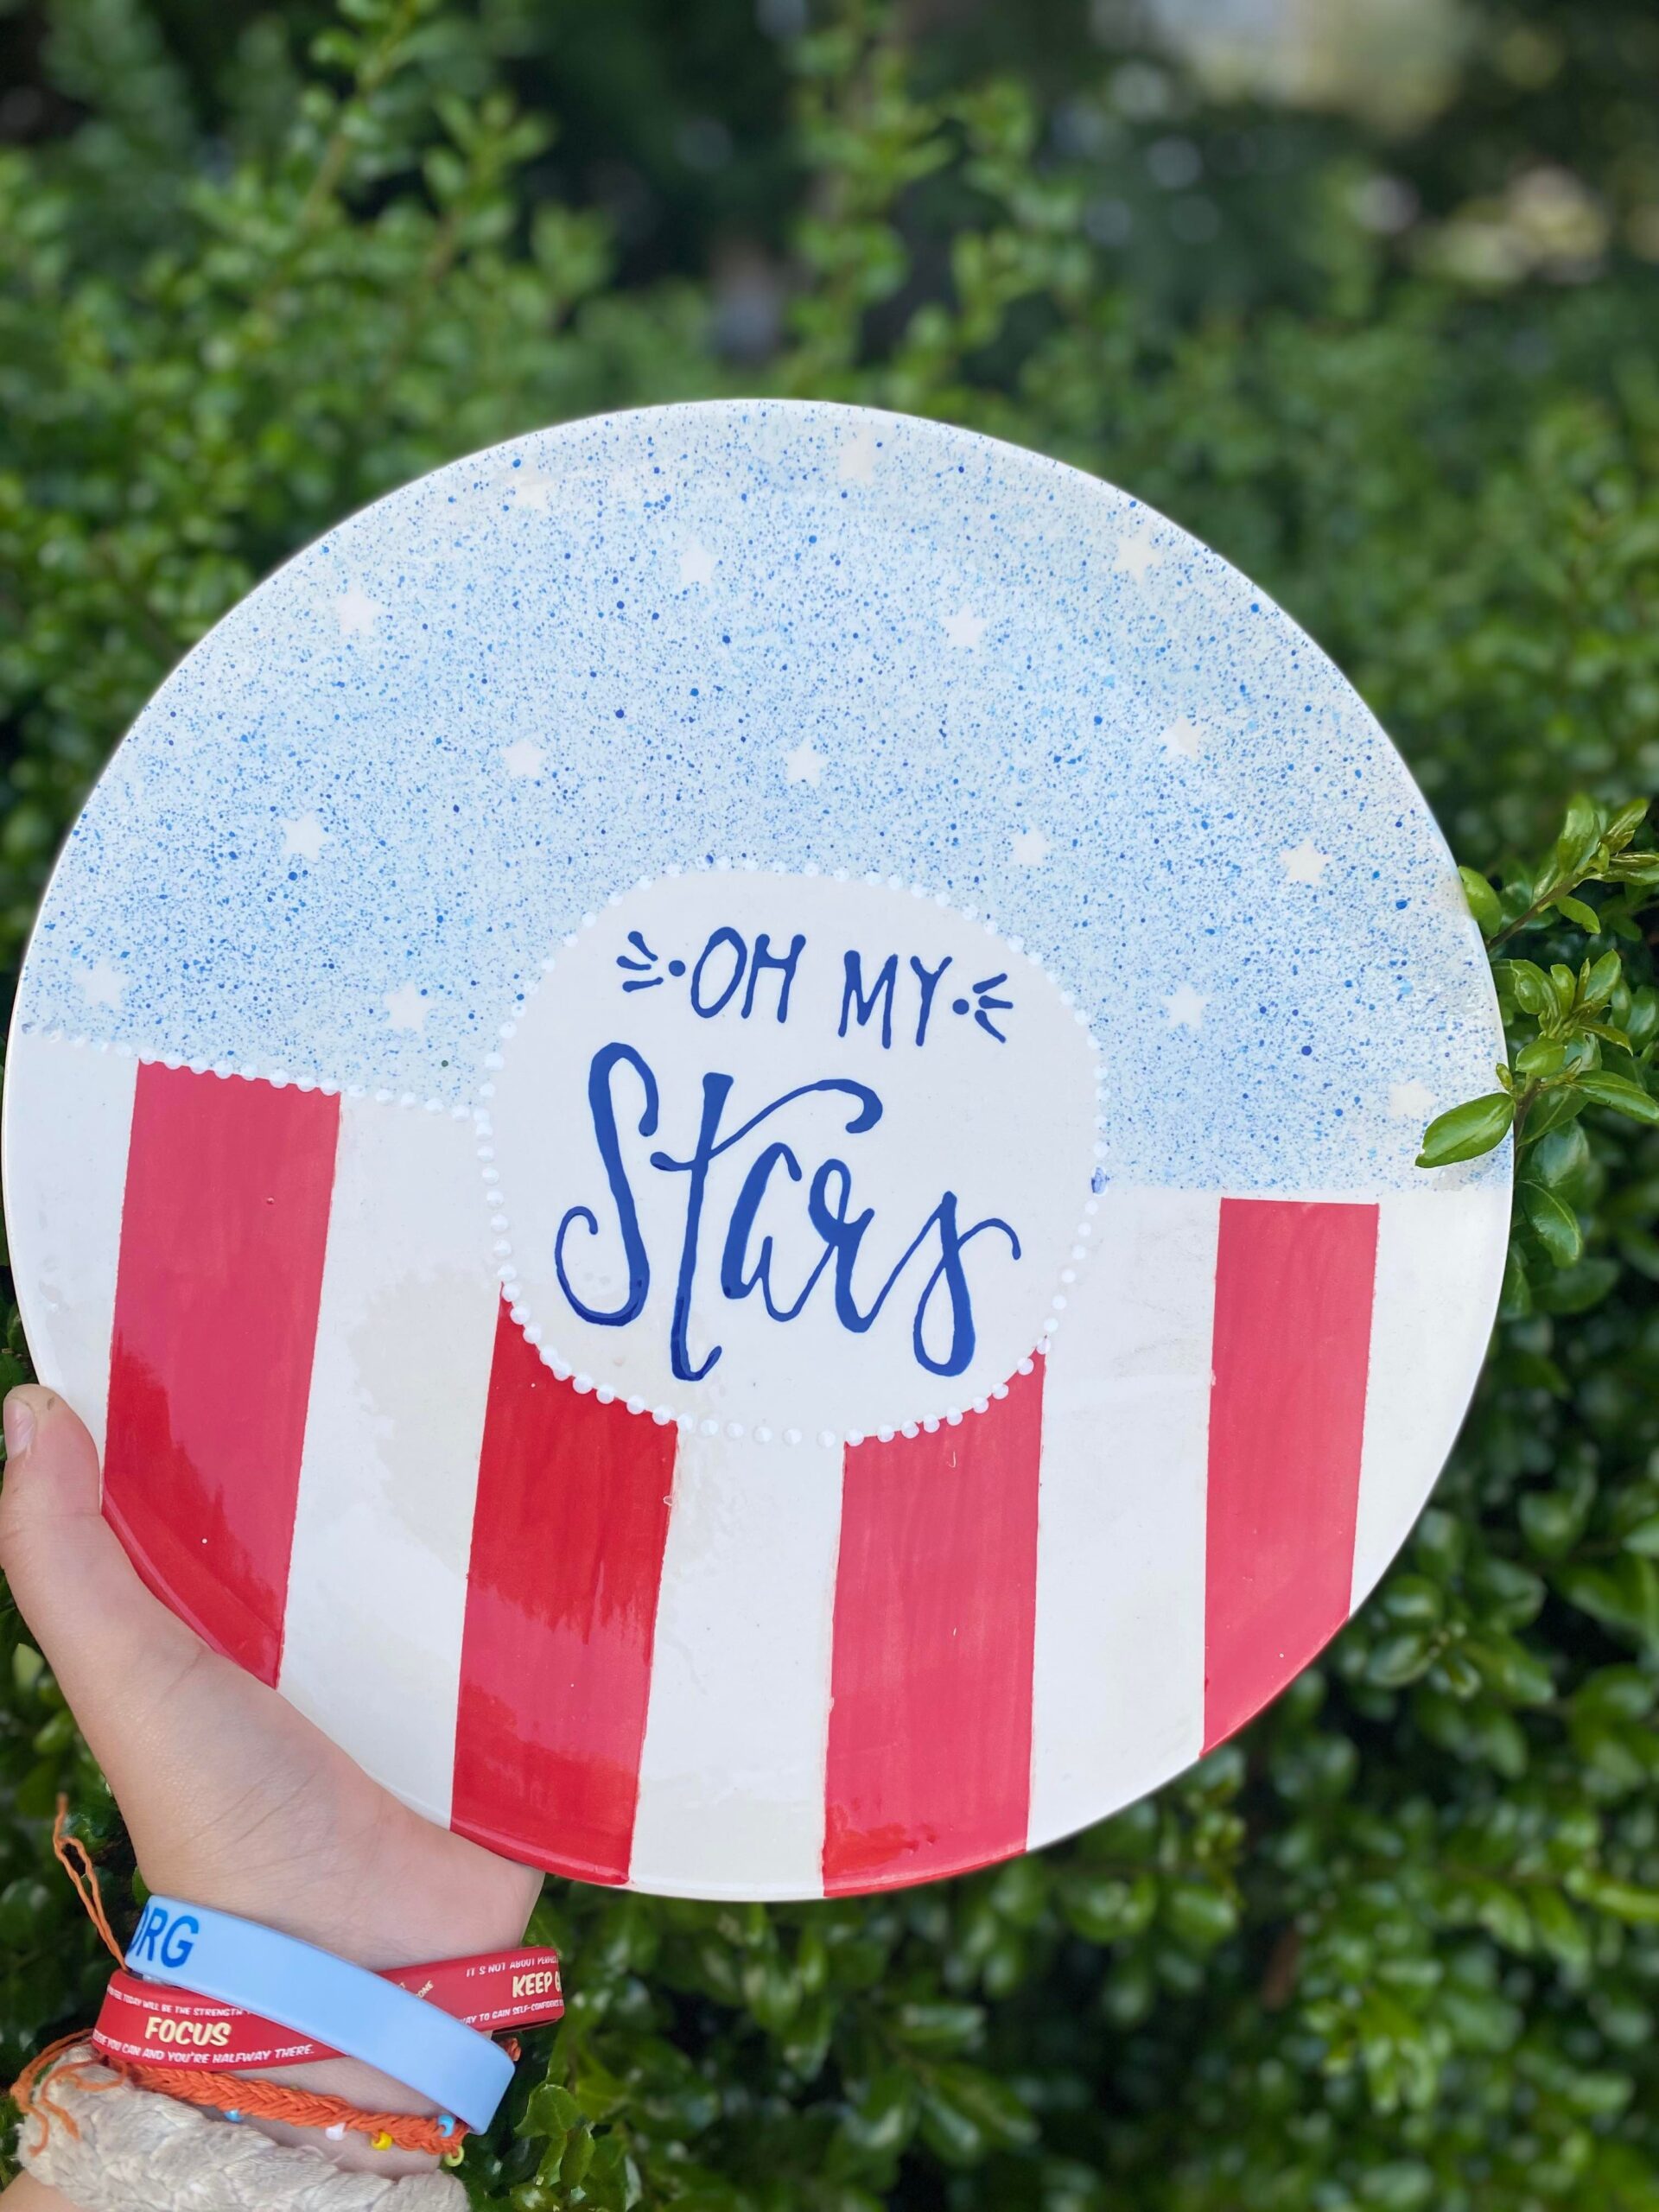 A hand holding up a plate with the words " oh my stars ".